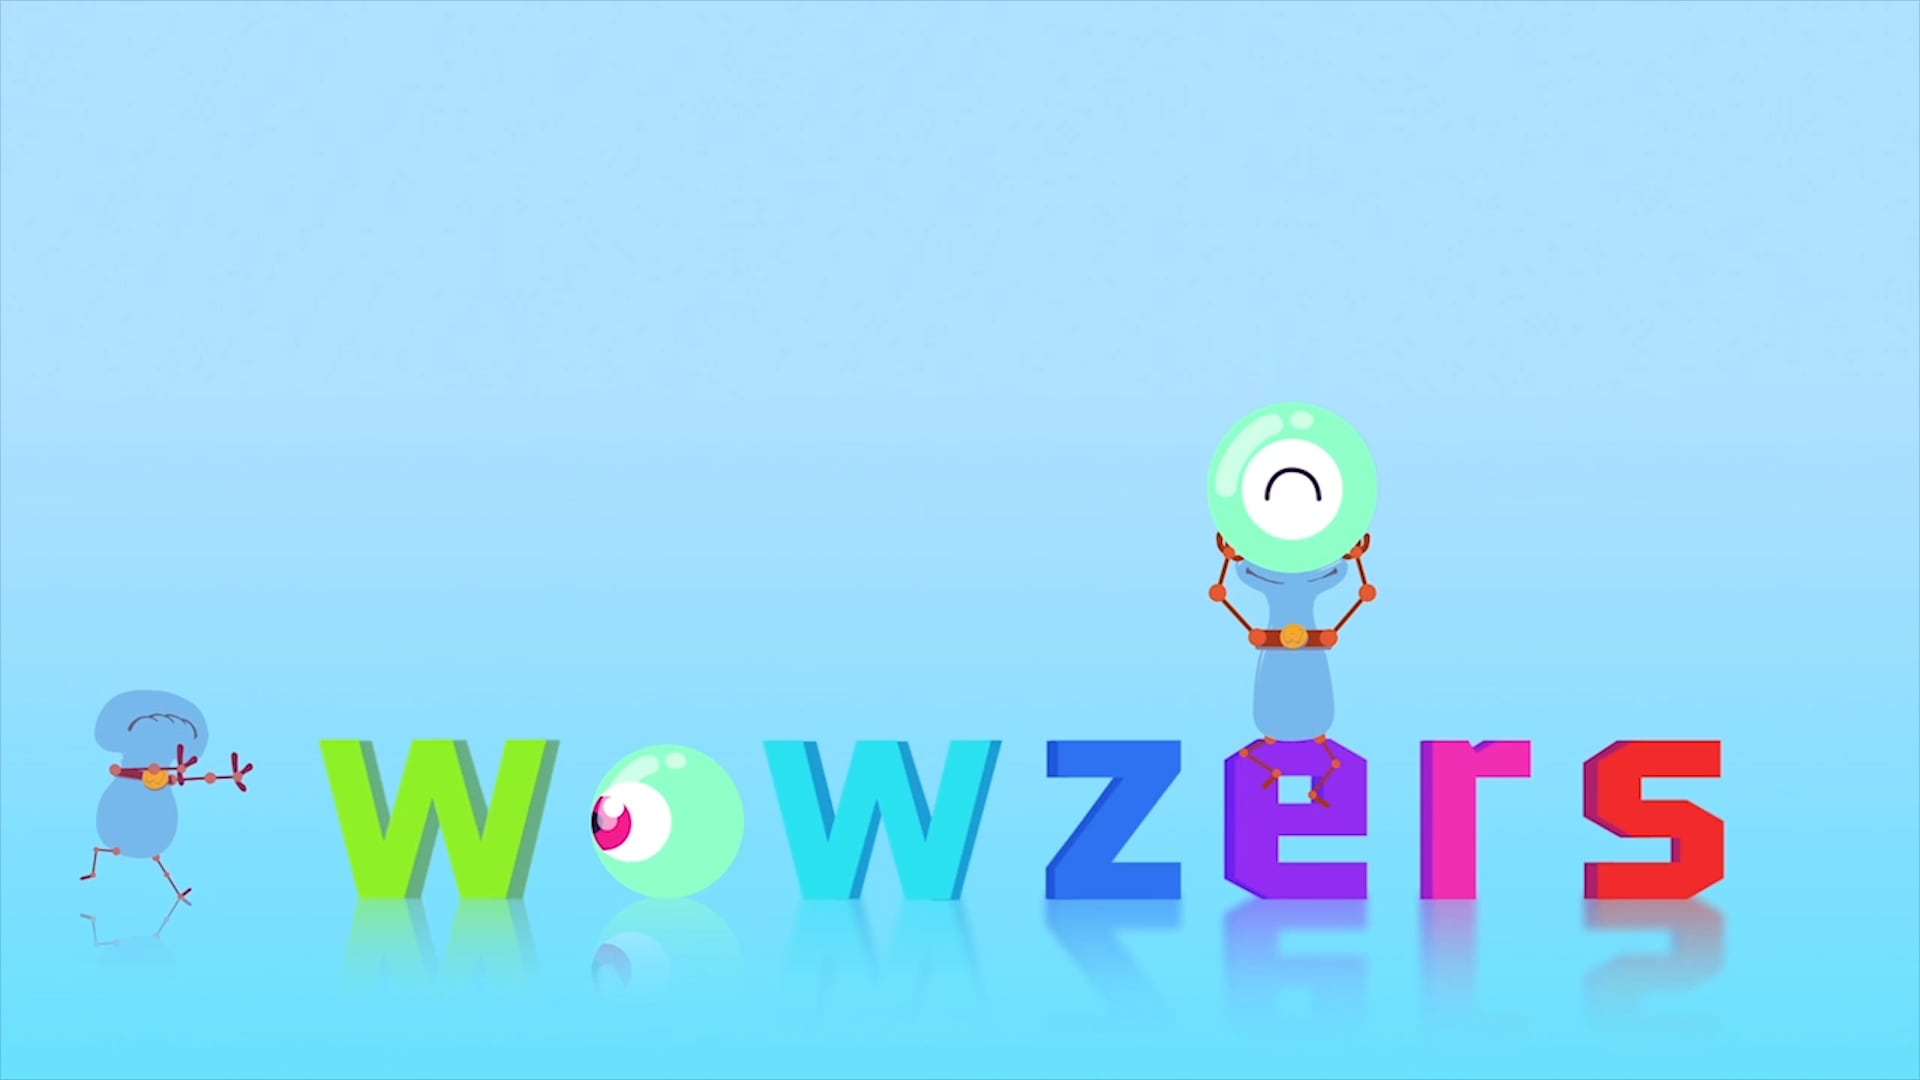 animated character videos for kids - wowzers alien image